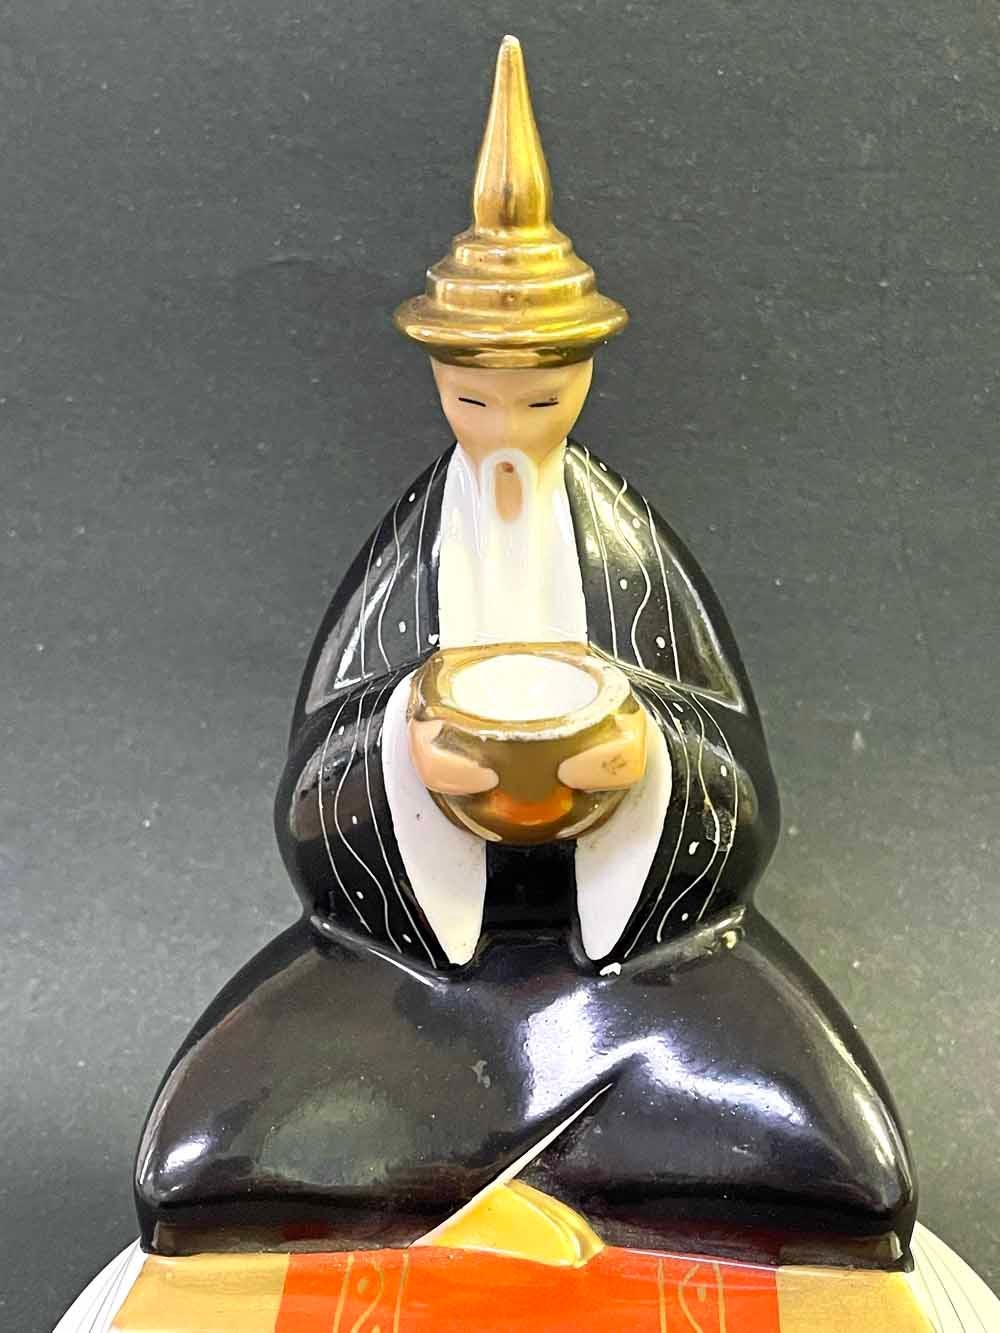 Both charming and sophisticated, this porcelain perfume warmer -- featuring a bearded Chinese man with a pointed hat and black robe at the top of a stepped platform -- was made by Robj, one of France's most prolific makers of fine figural pieces in